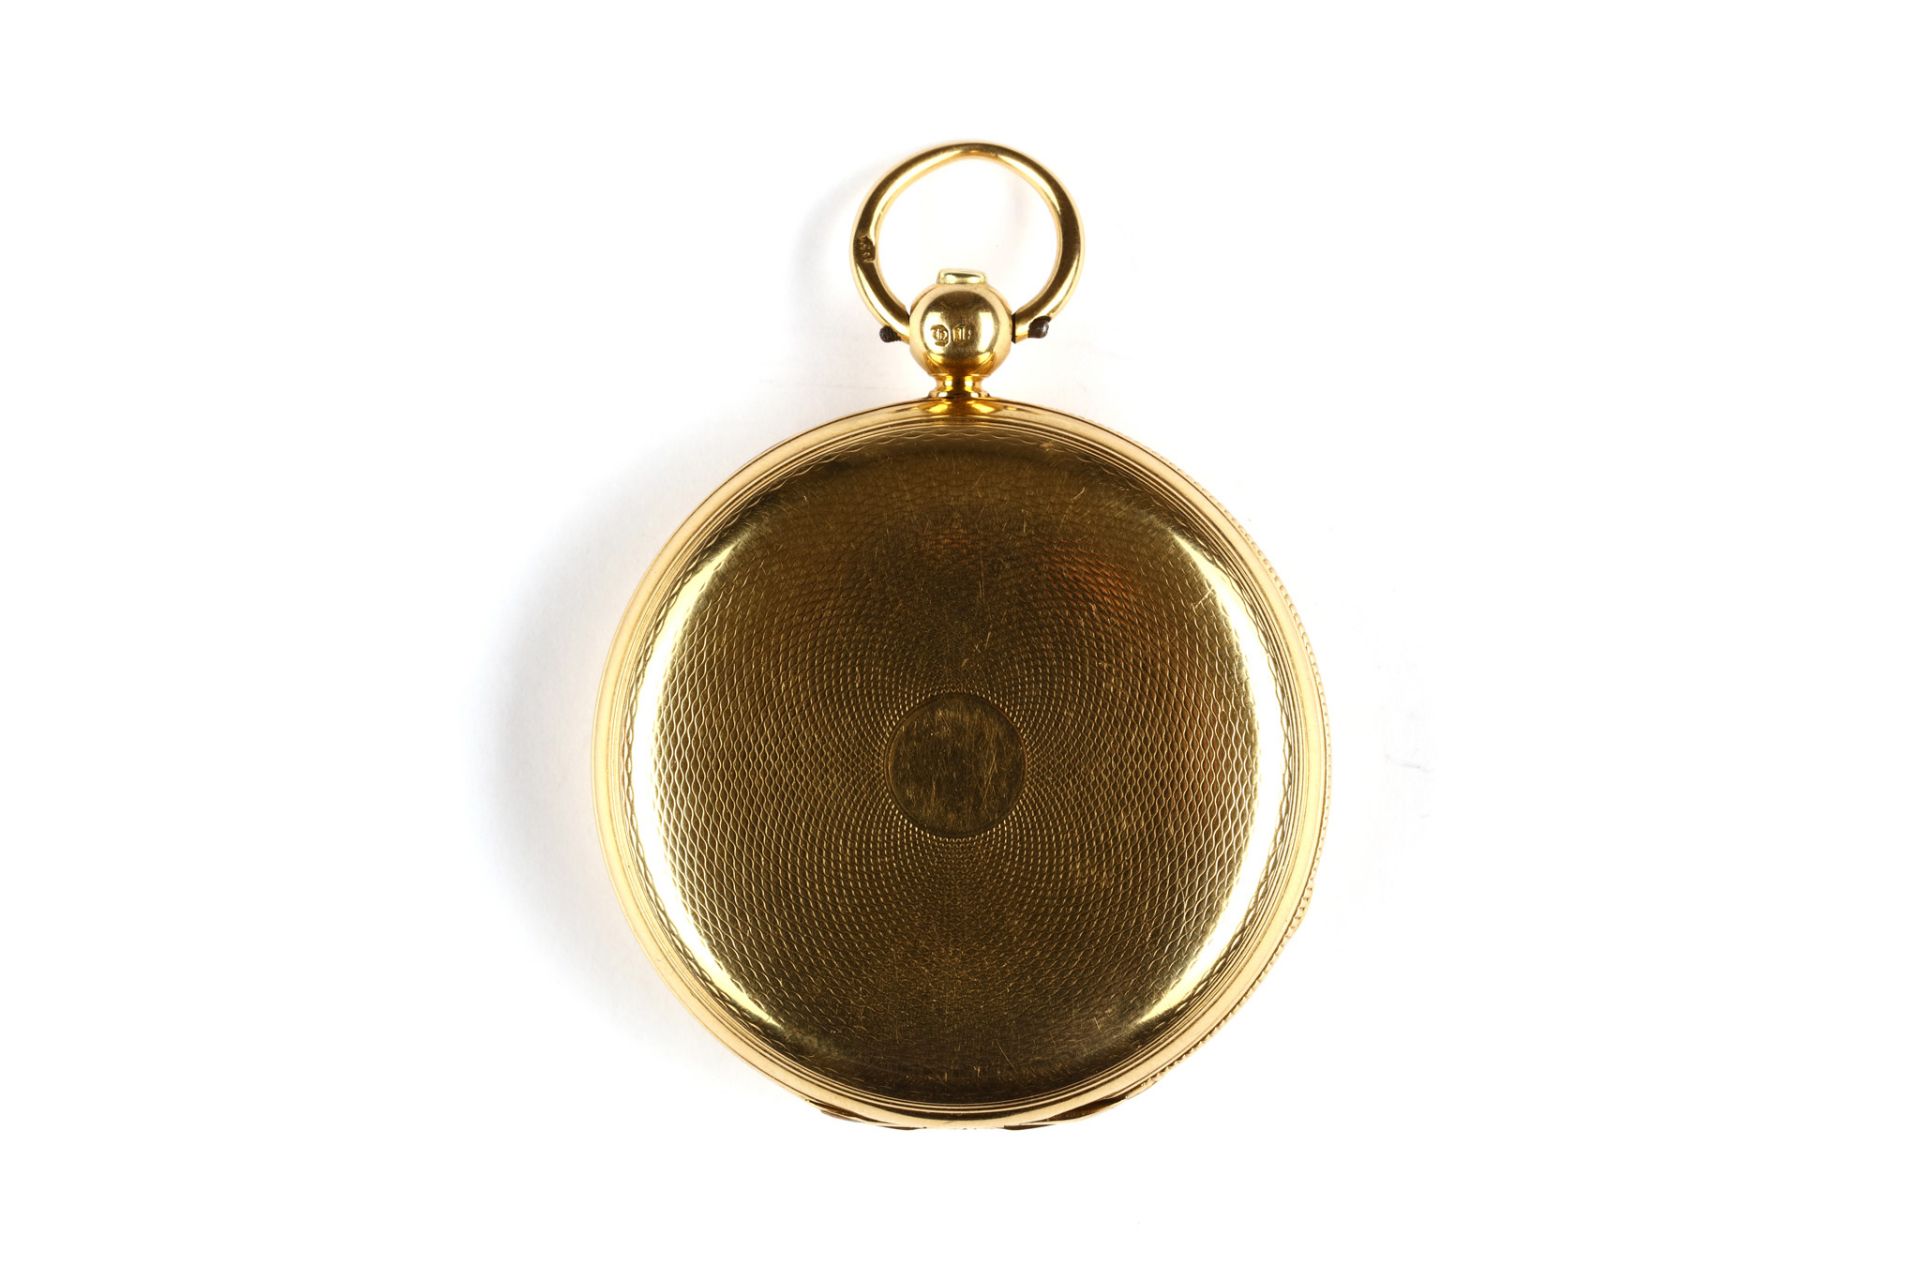 James McCabe. An 18K gold full hunter pocket watch. Case reference: '15263' and stamped 'IMC' (for - Image 2 of 3